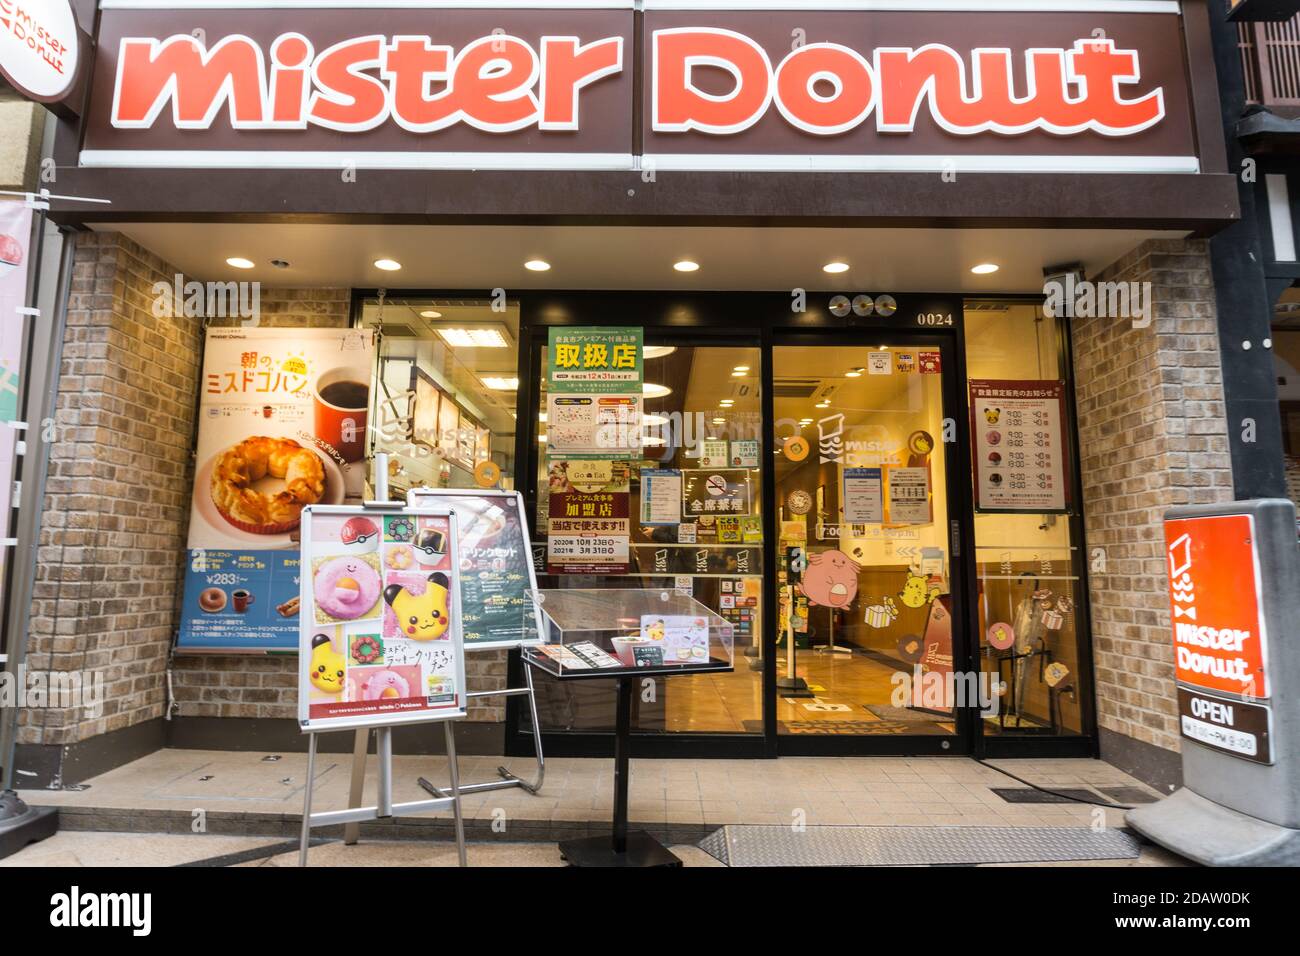 A Mister Donut fast food restaurant / cafe in Nara, Japan Stock Photo